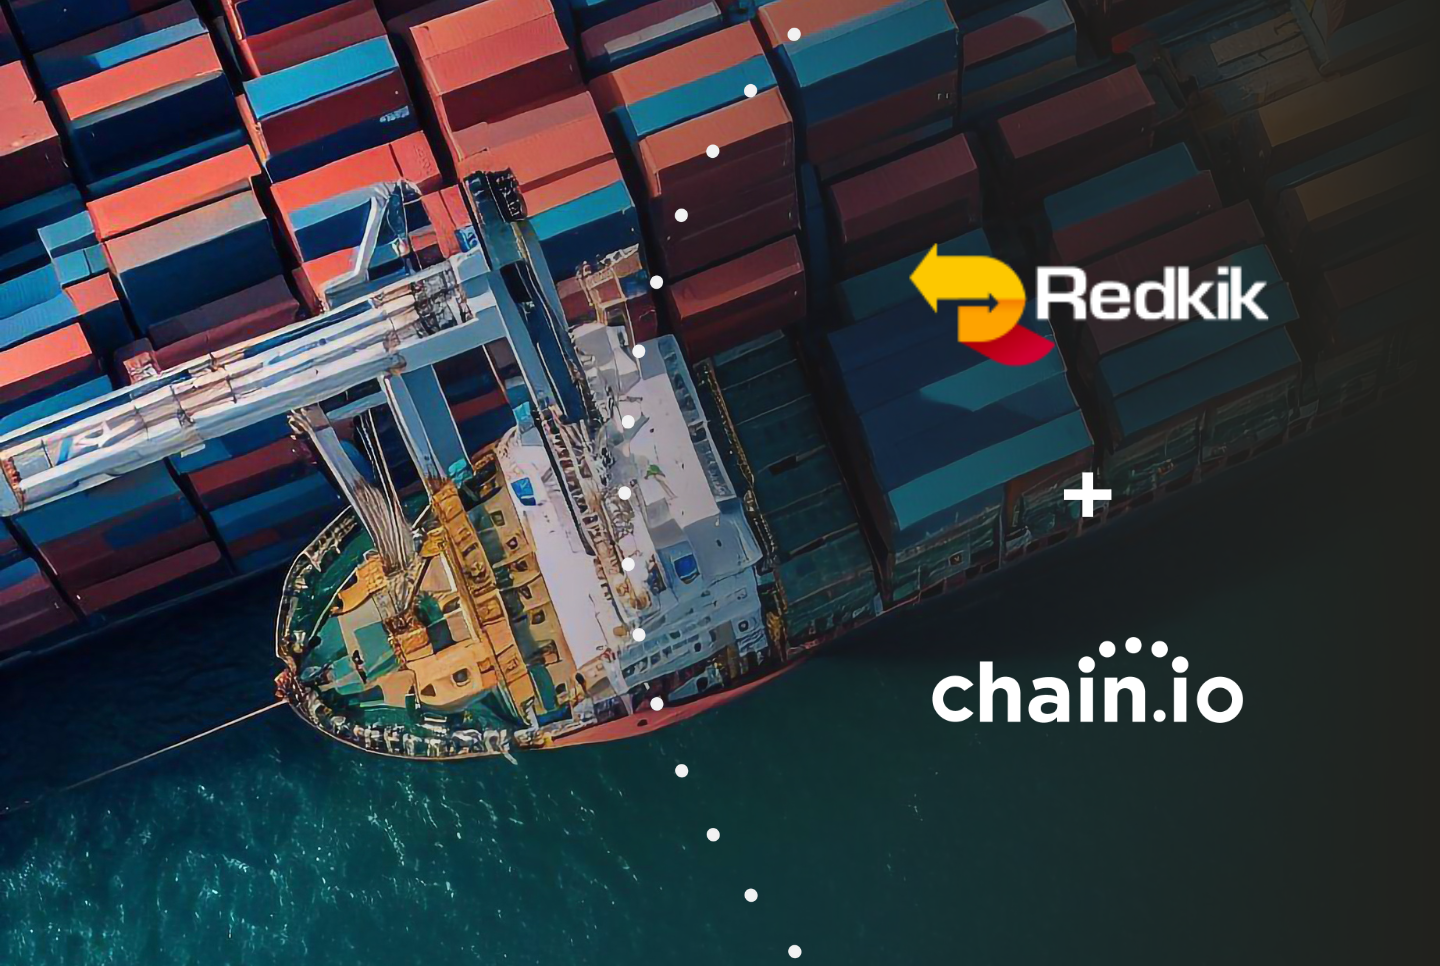 Redkik joins the Chain.io Network